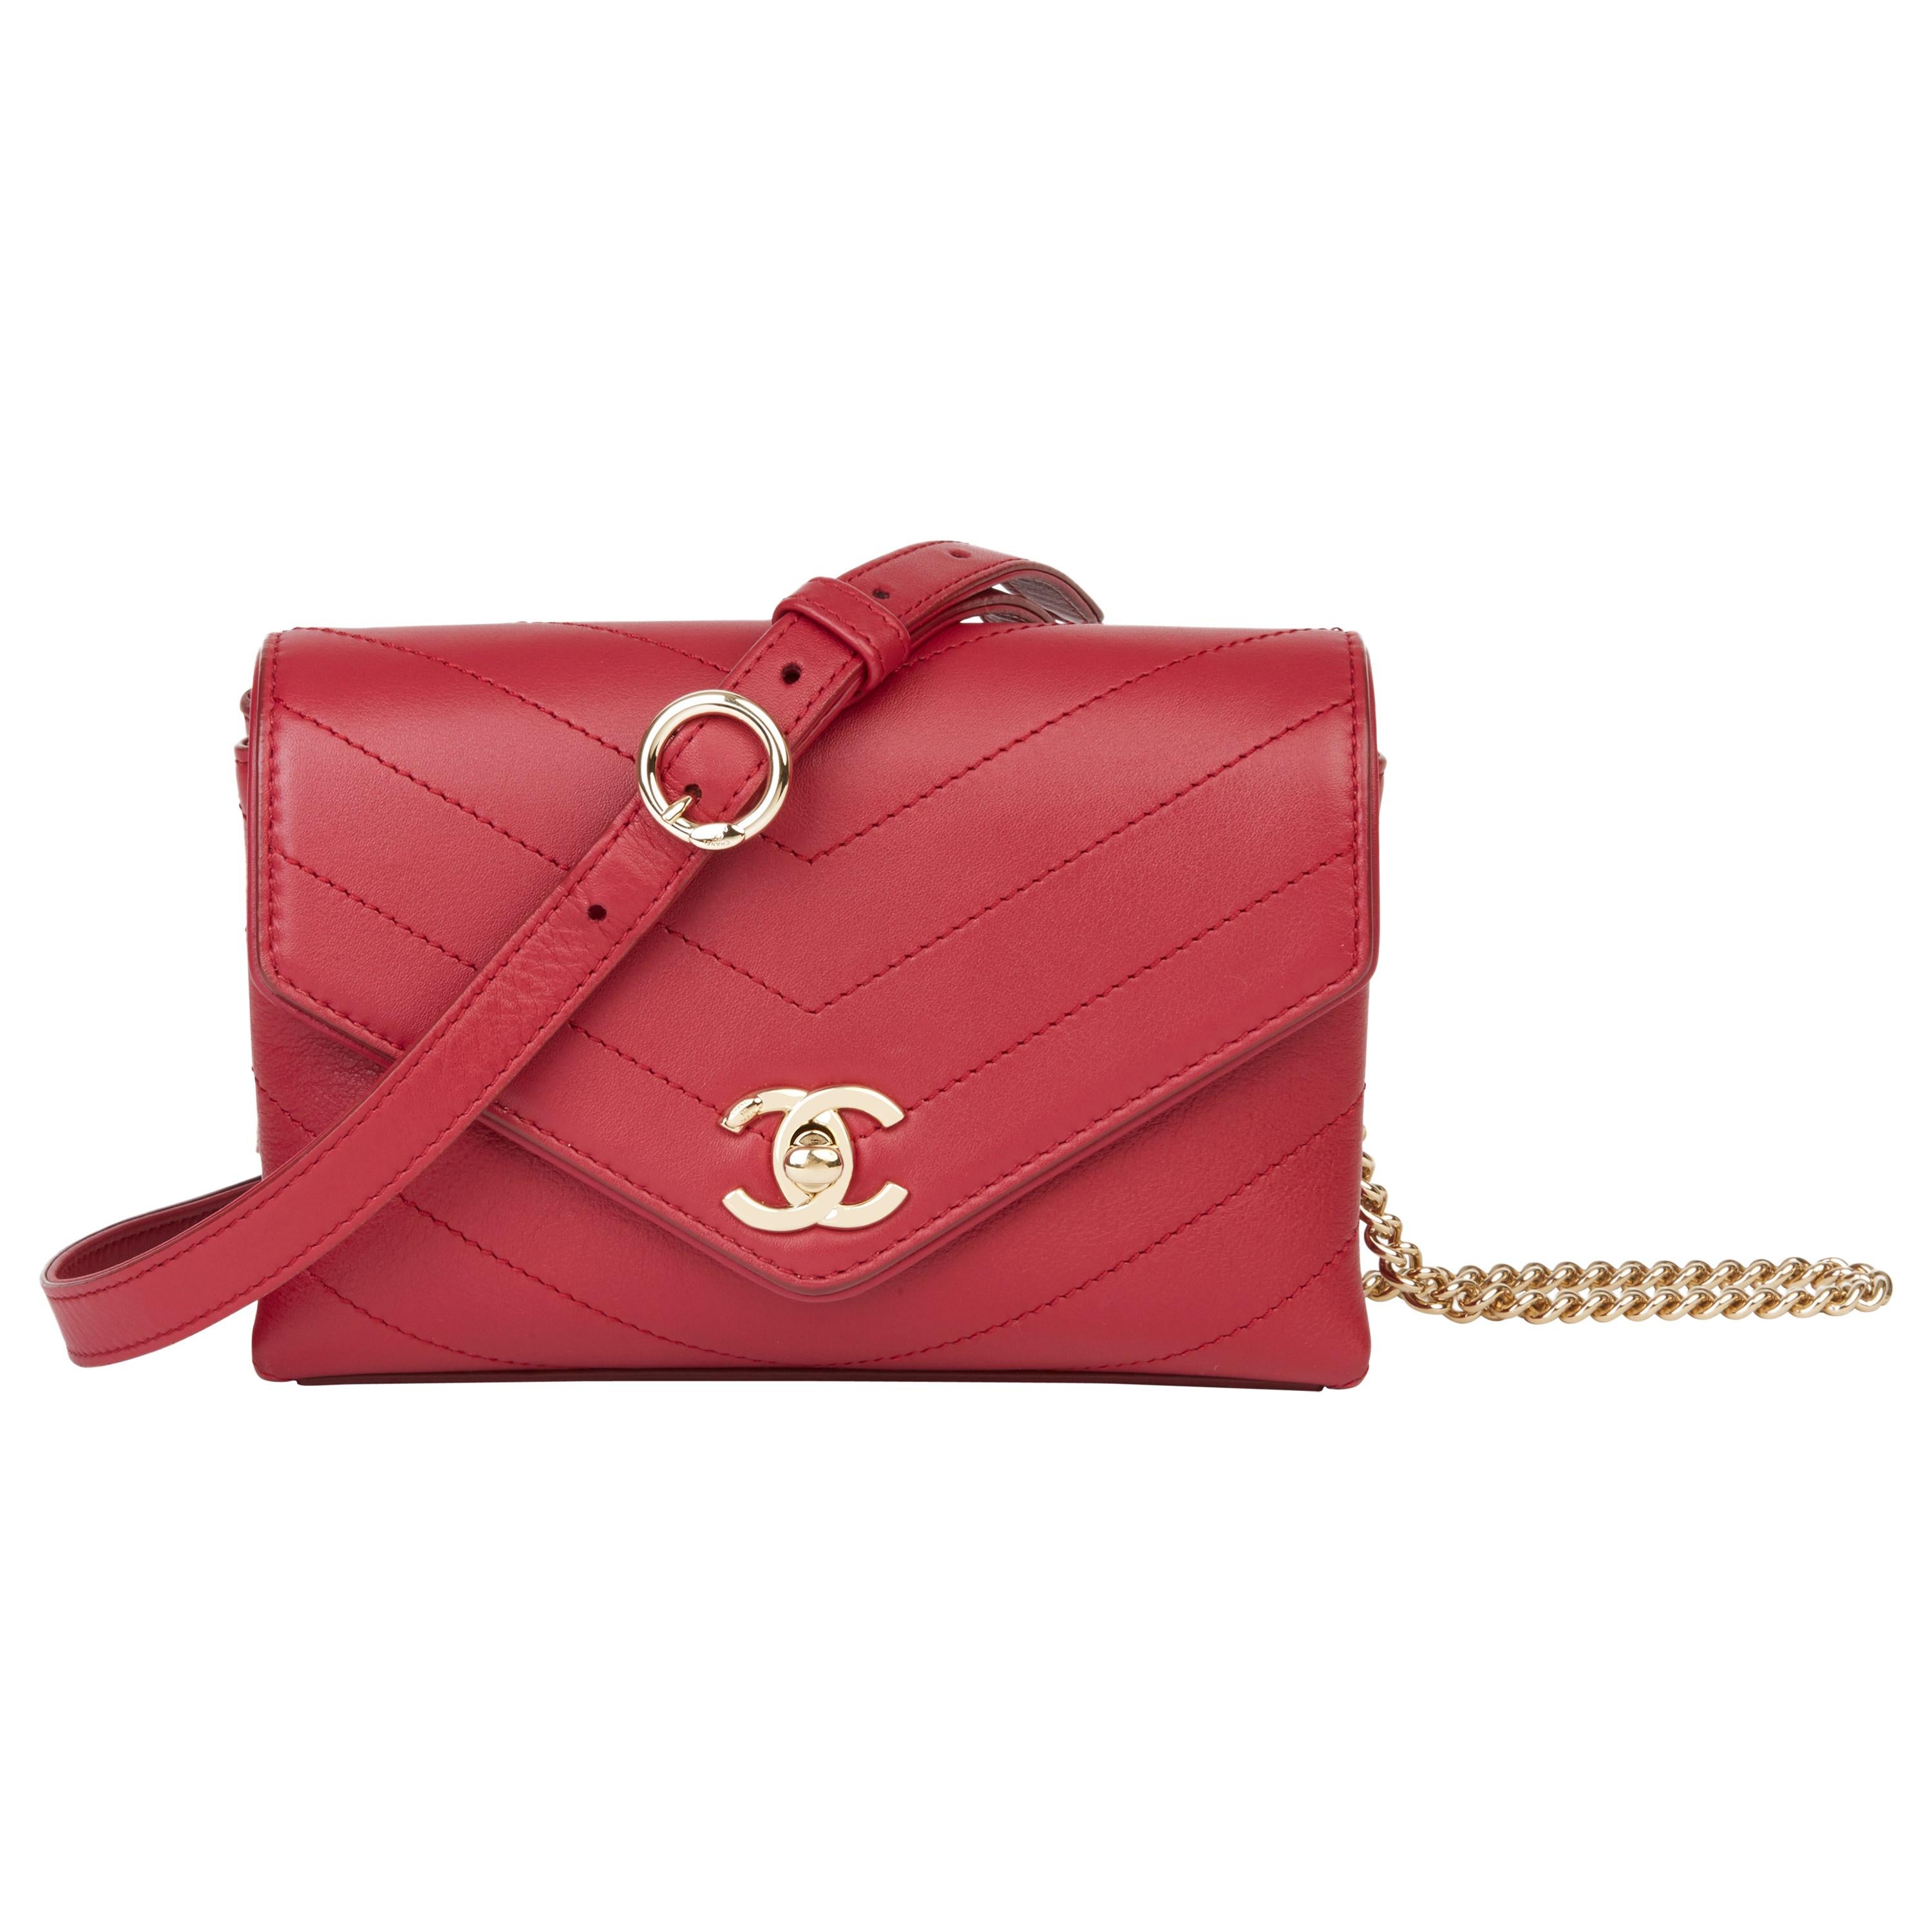 2019 Chanel Red Chevron Quilted Calfskin Leather Coco Waist Bag